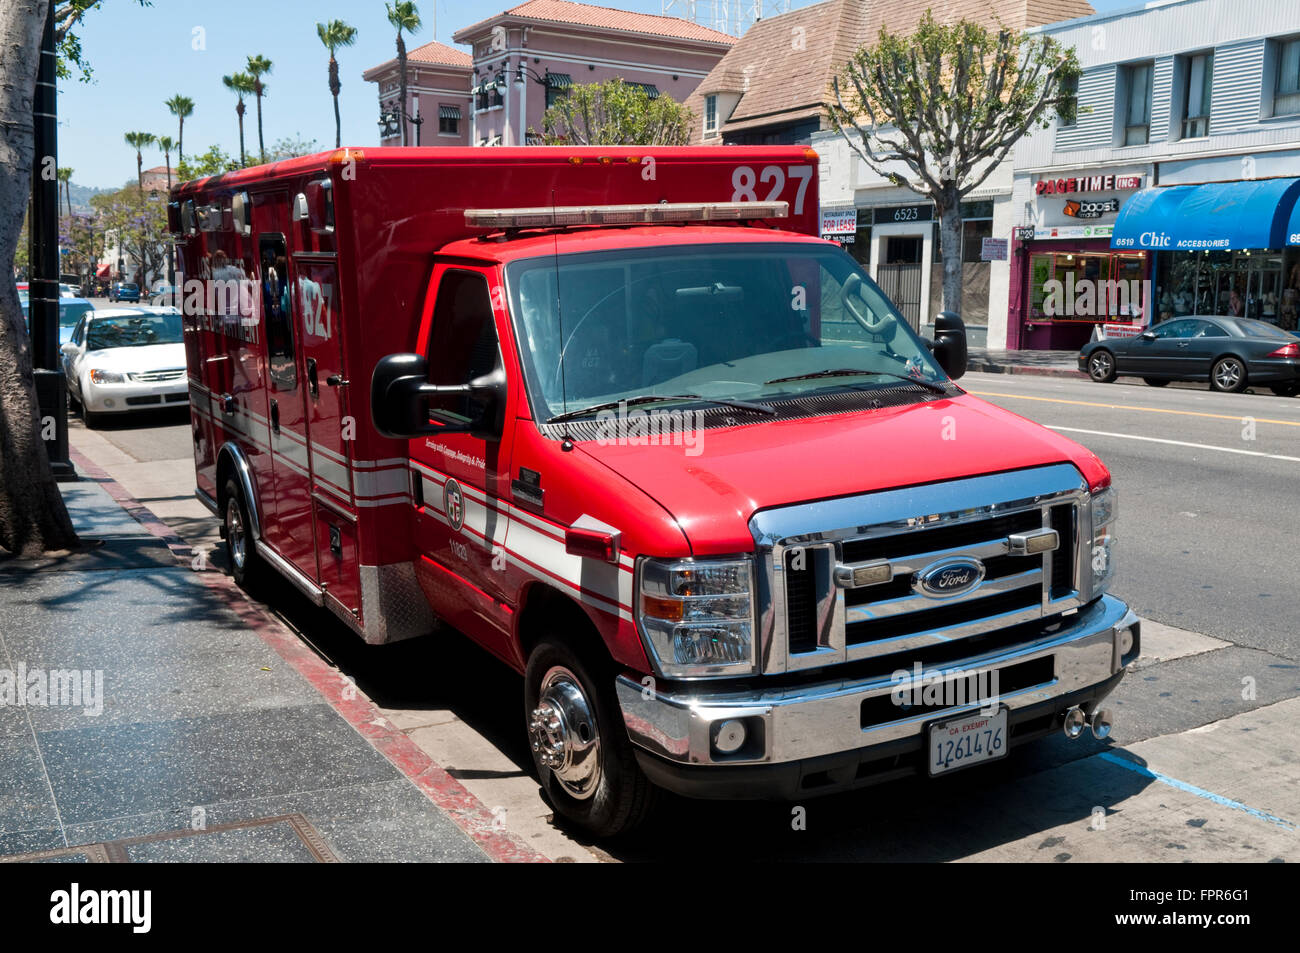 A red Los Angeles County Fire engine in Hollywood, California Stock Photo